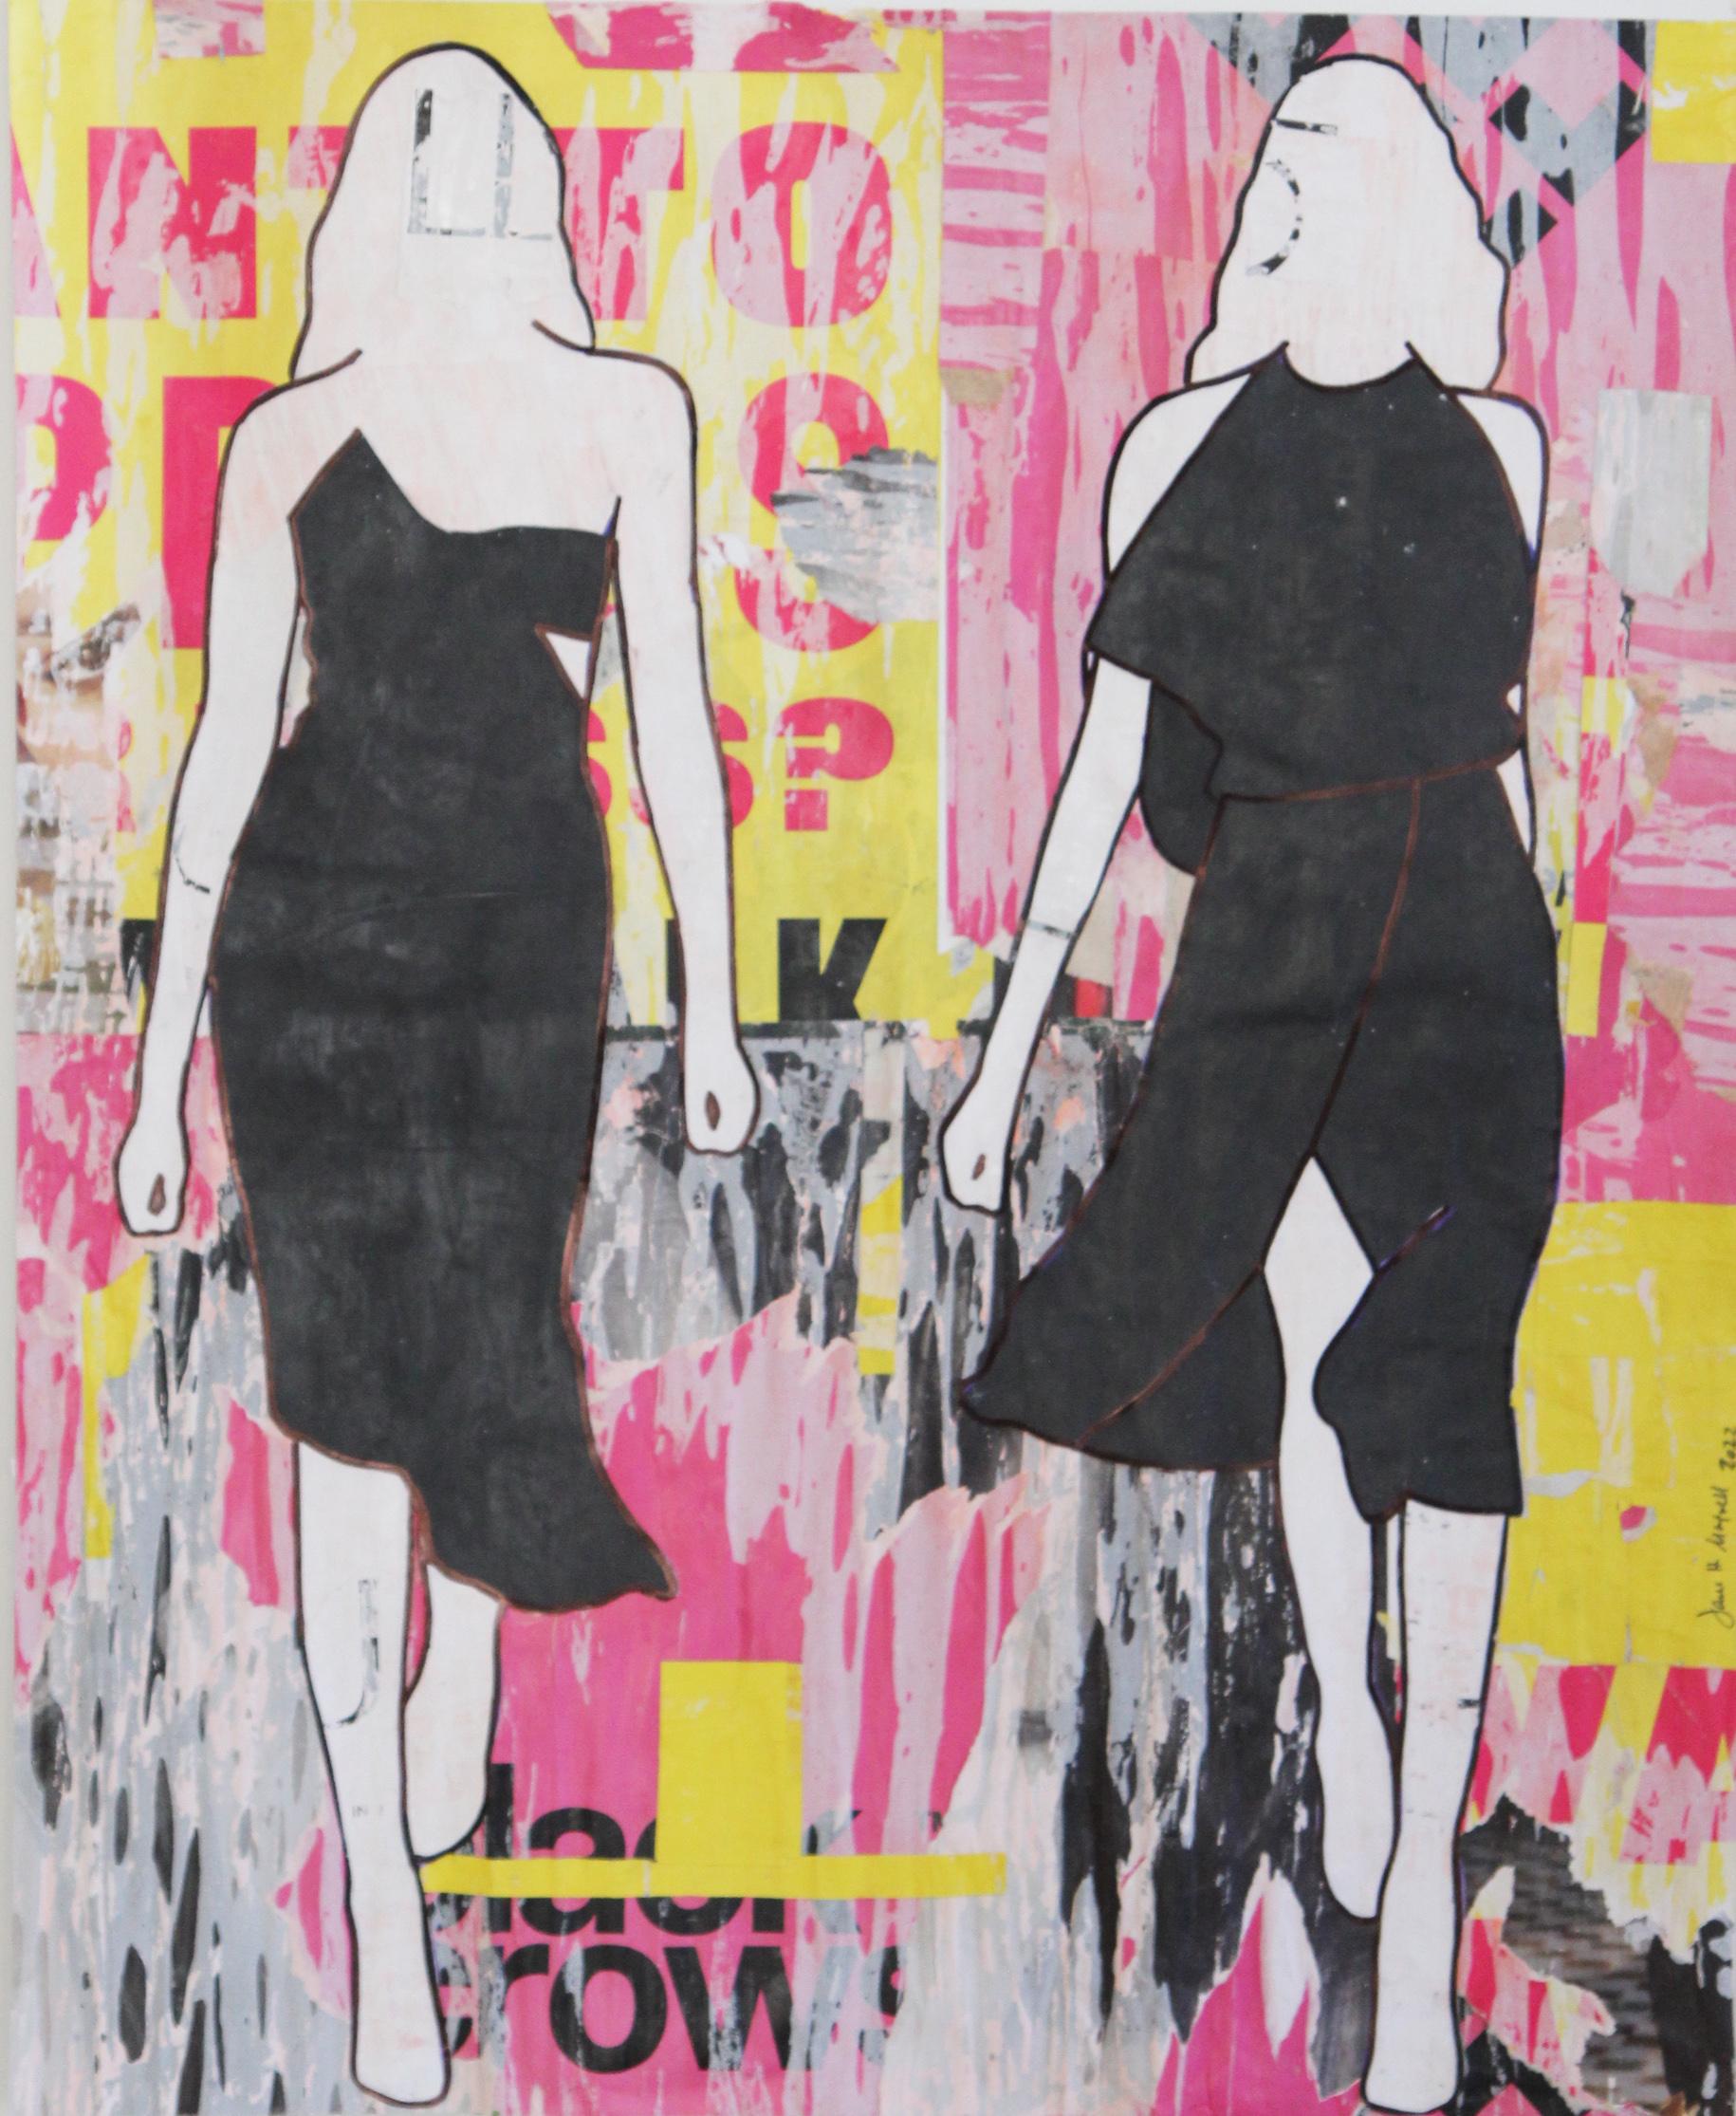 JANE MAXWELL
"Pink & Yellow Walking Girls"
Mixed Media on Paper
36" x 31" Unframed ; 42.25" x 35.50" Framed 

Jane Maxwell’s artwork approaches the female body with an affectionate and celebratory feminist perspective. Extending her focus on female